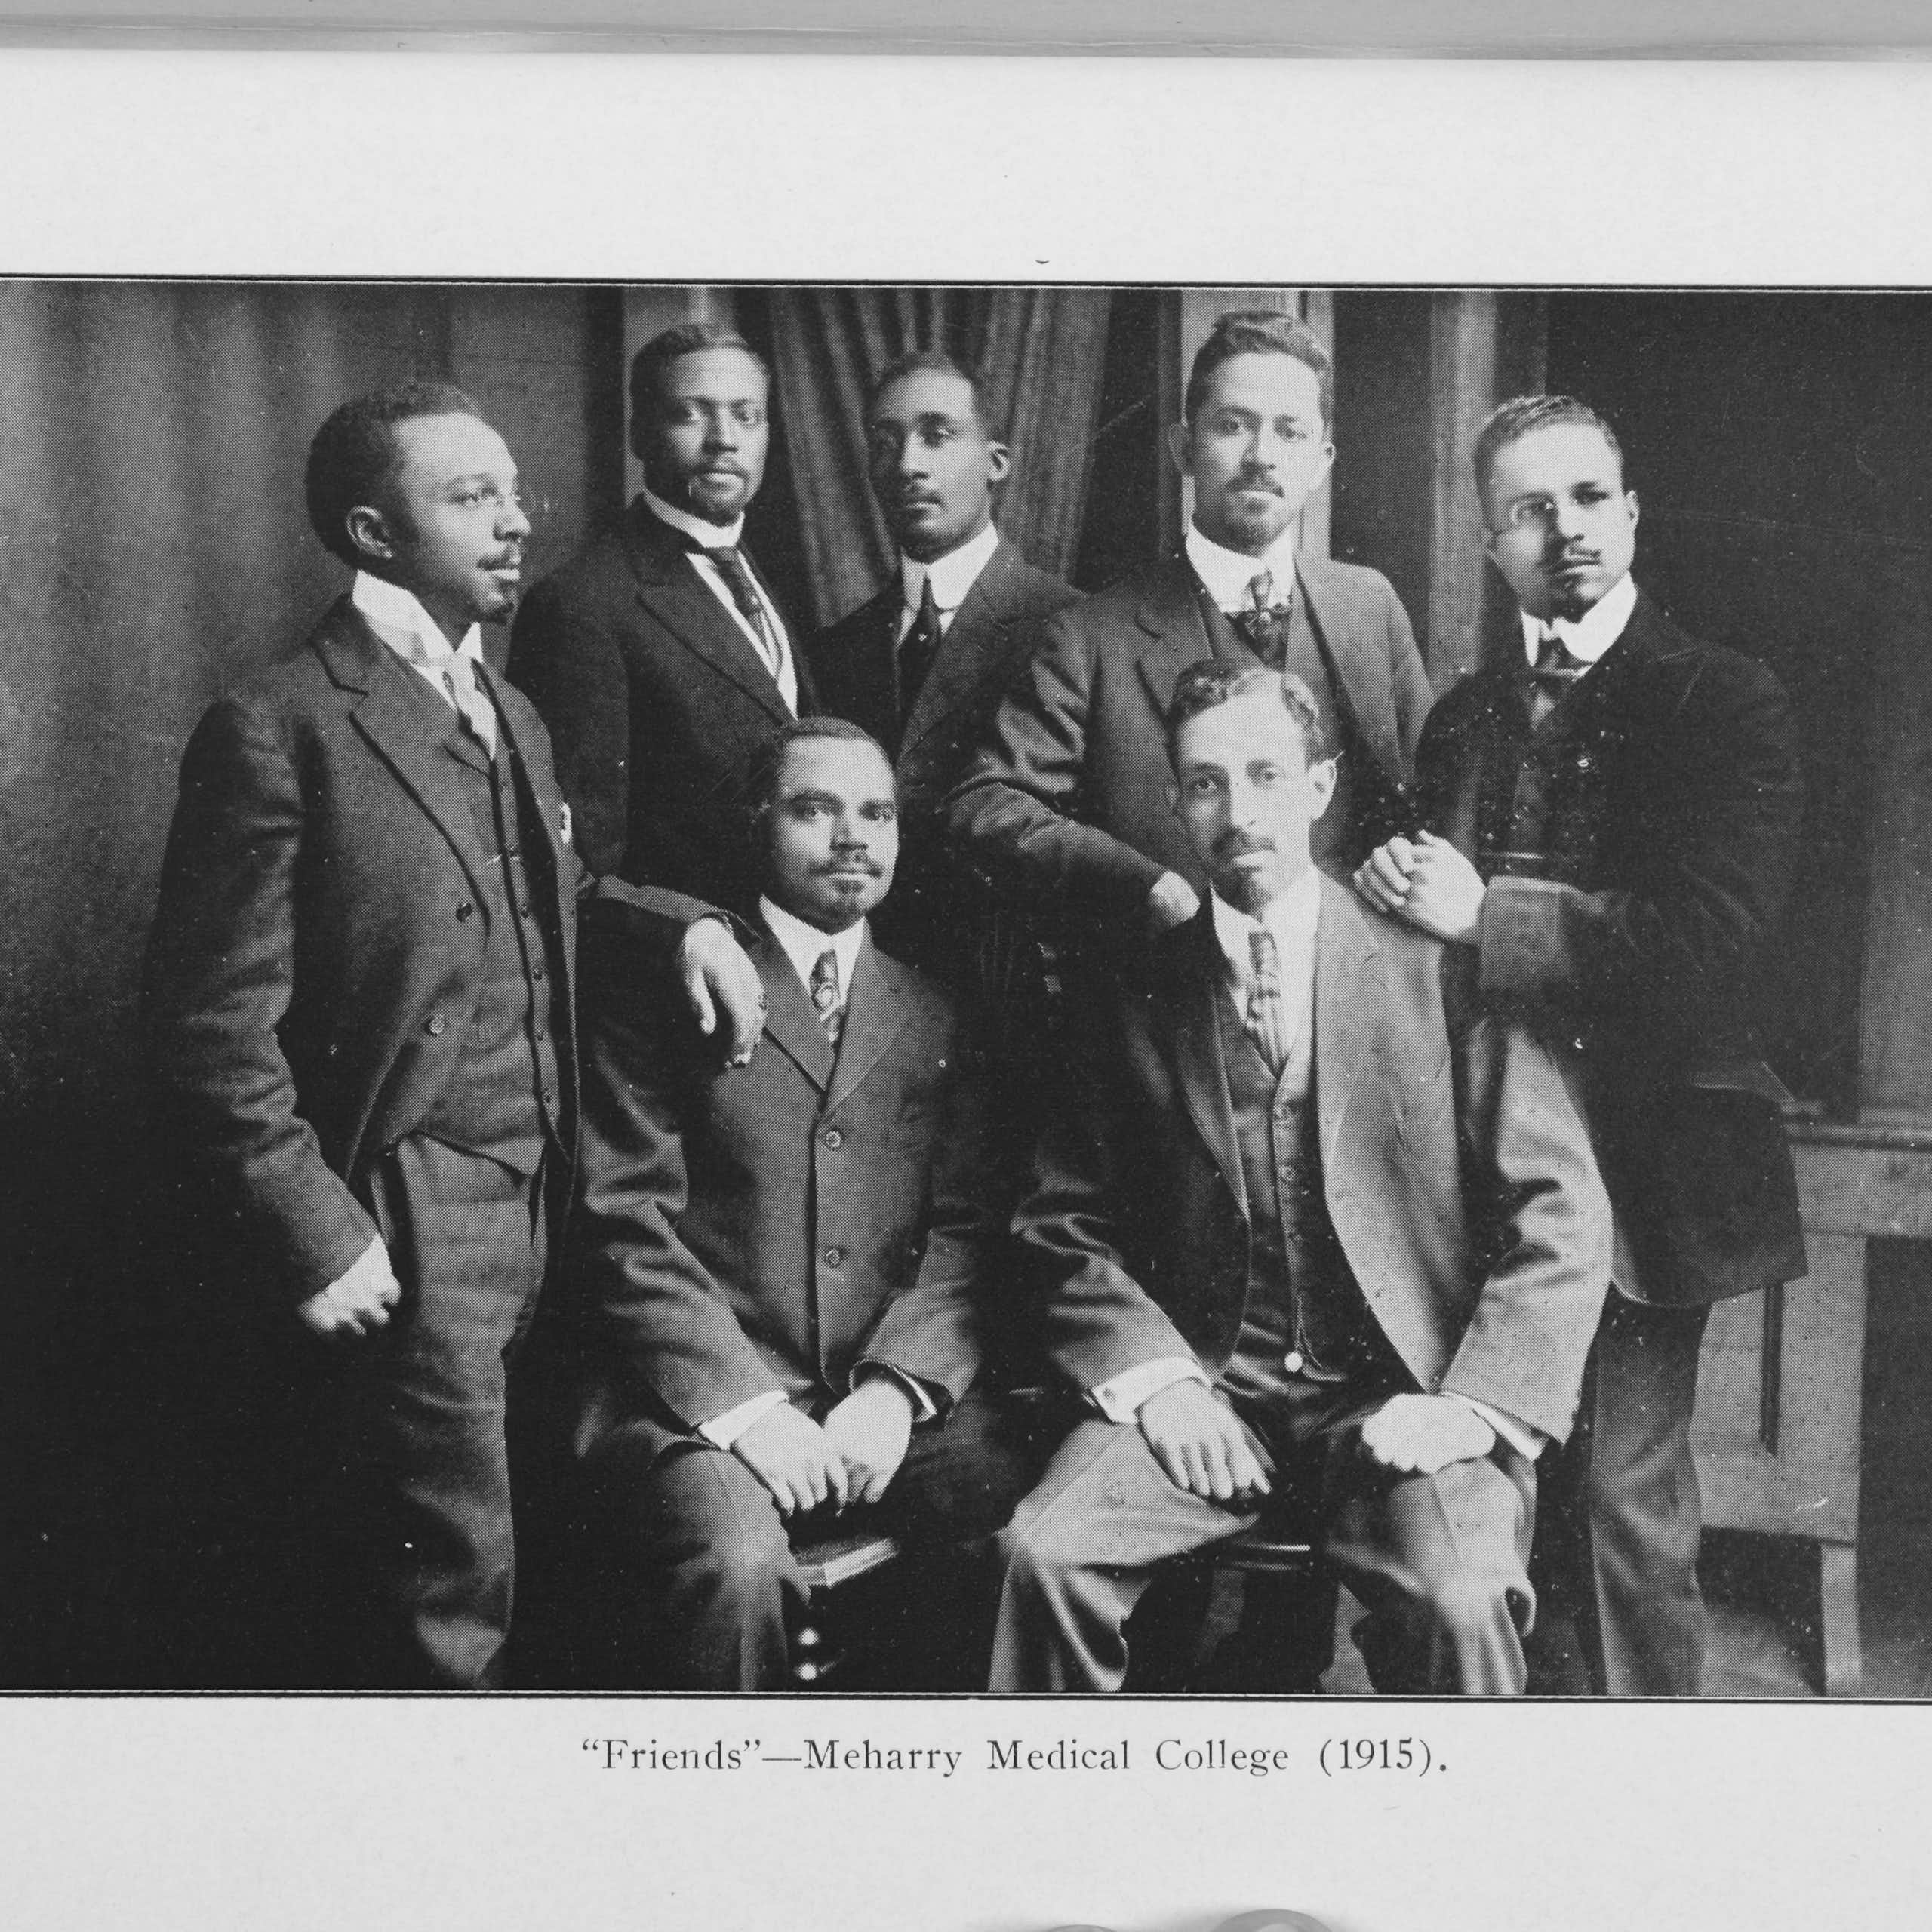 A group of seven Black men are dressed in business suits.